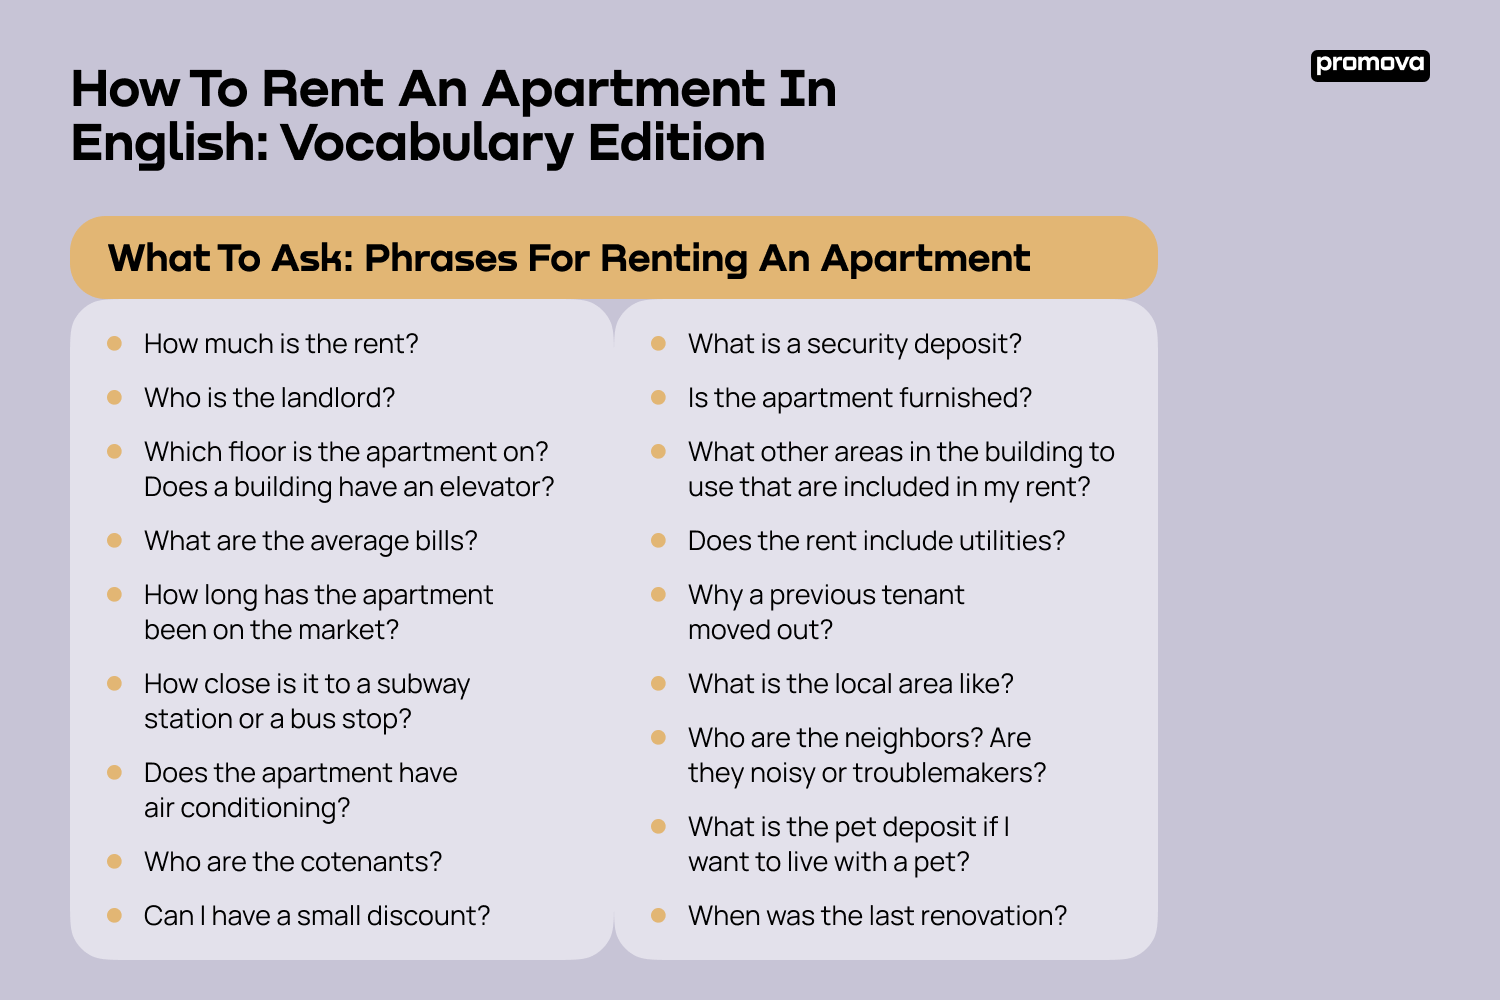 Exploring Phrases For Renting An Apartment In English